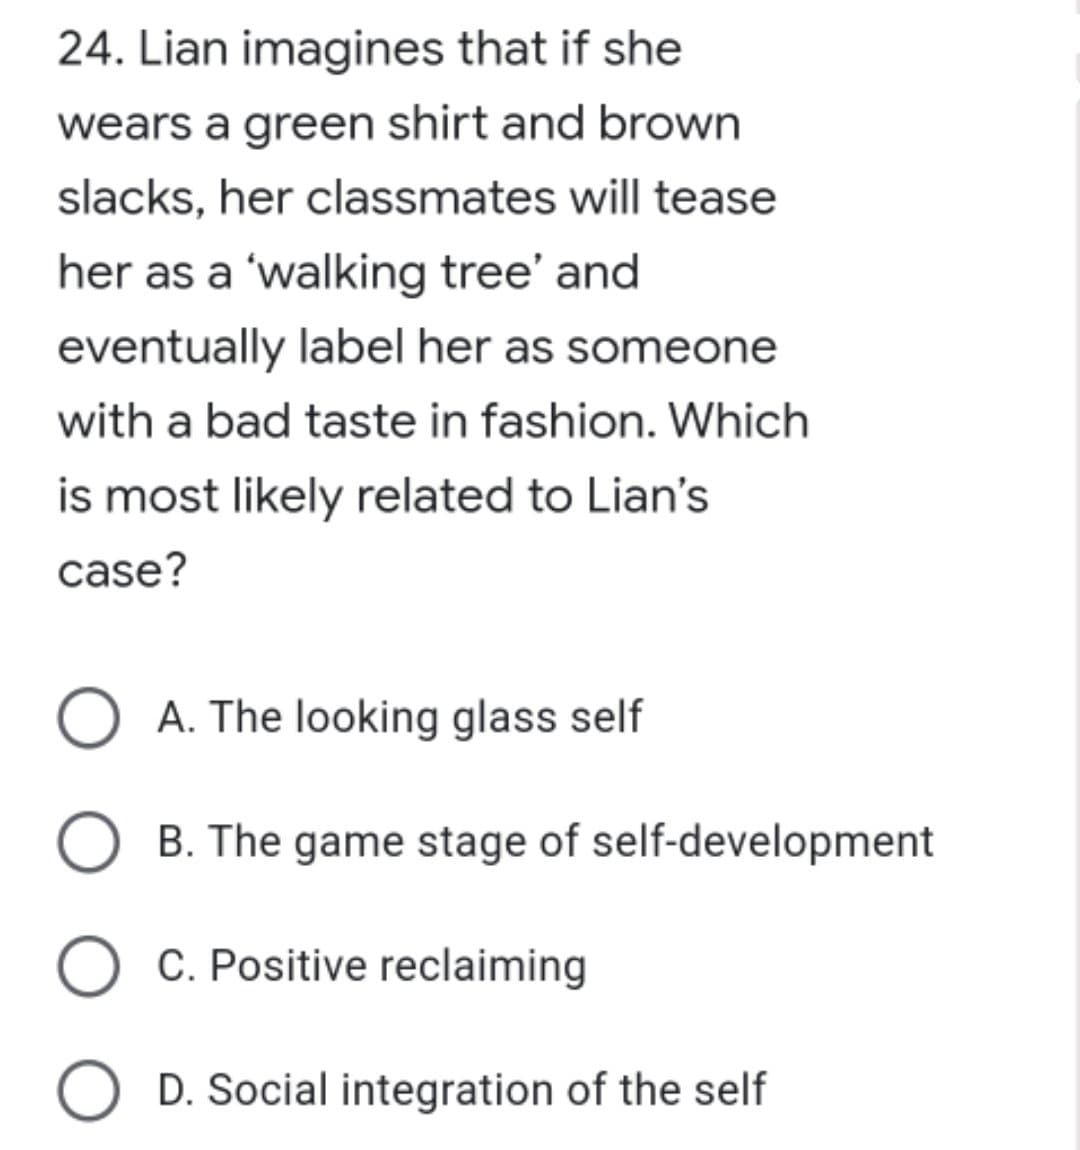 24. Lian imagines that if she
wears a green shirt and brown
slacks, her classmates will tease
her as a 'walking tree' and
eventually label her as someone
with a bad taste in fashion. Which
is most likely related to Lian's
case?
A. The looking glass self
O B. The game stage of self-development
O C. Positive reclaiming
O D. Social integration of the self